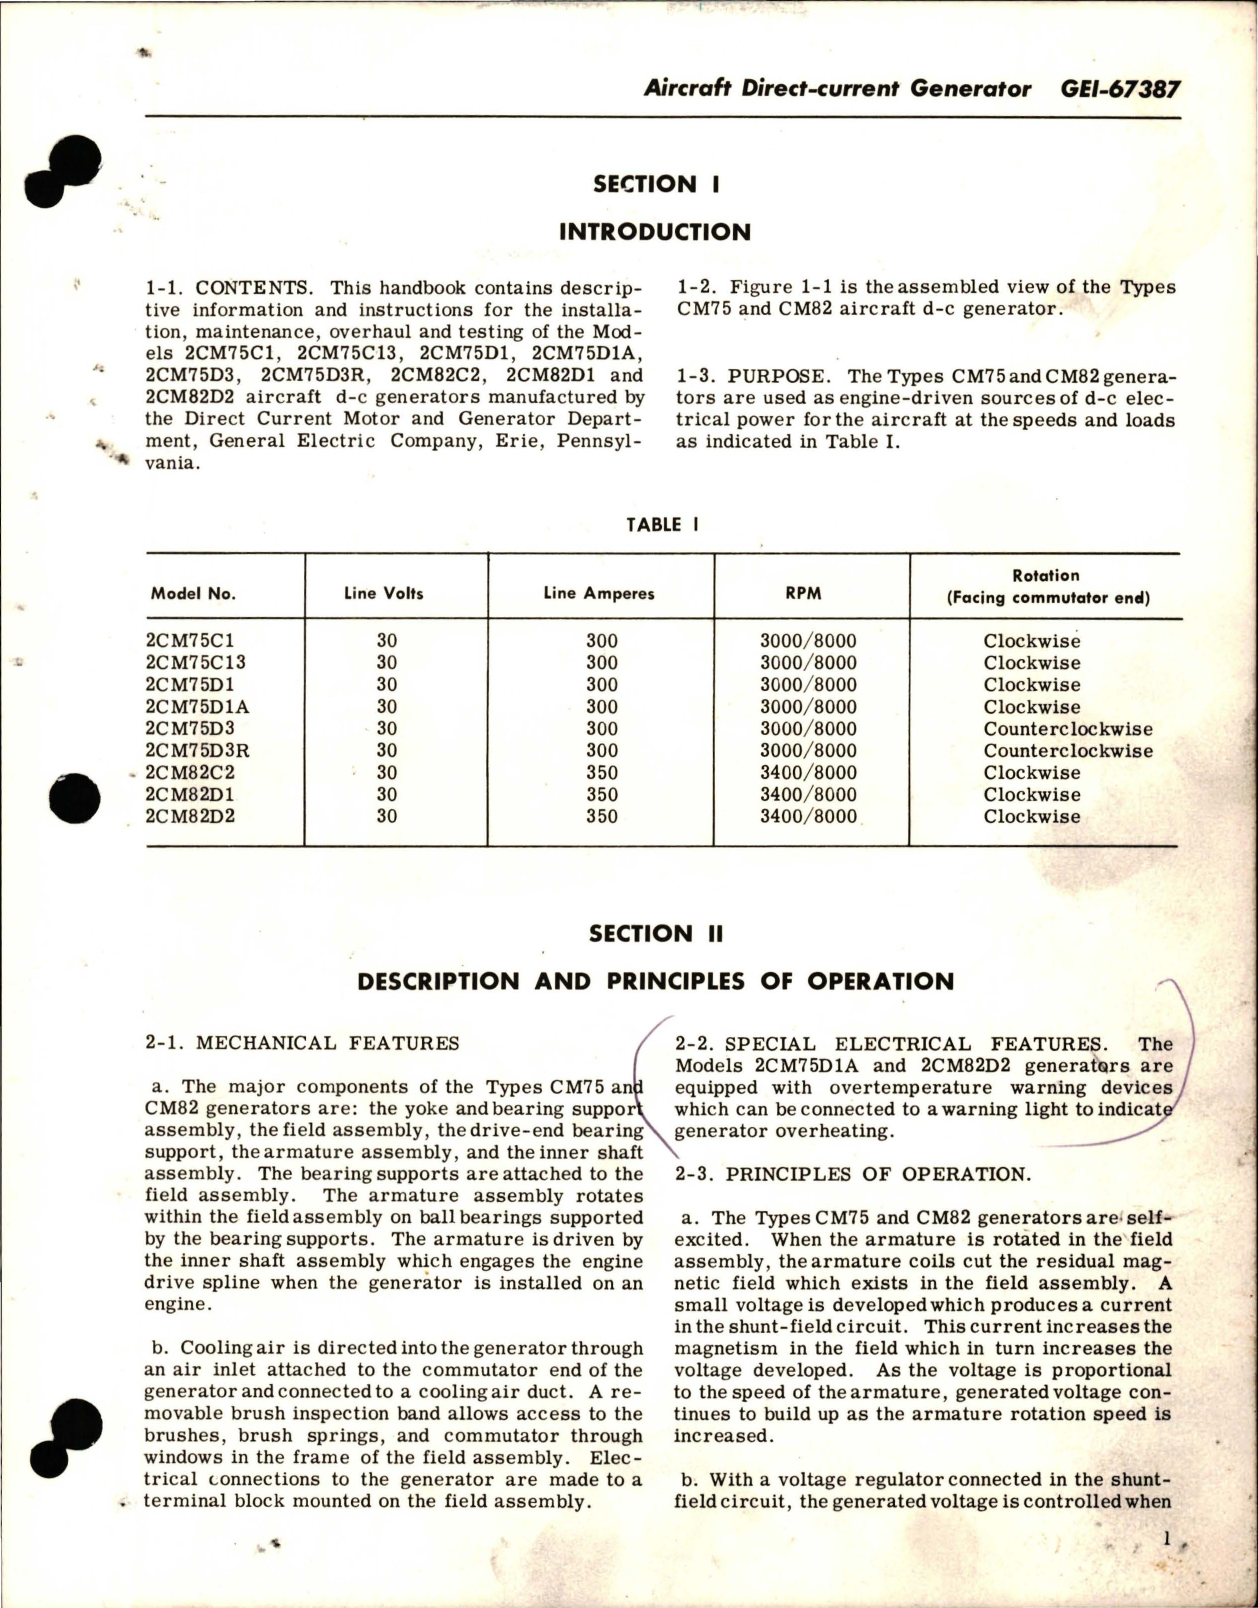 Sample page 5 from AirCorps Library document: Instructions for Direct-Current Generator 